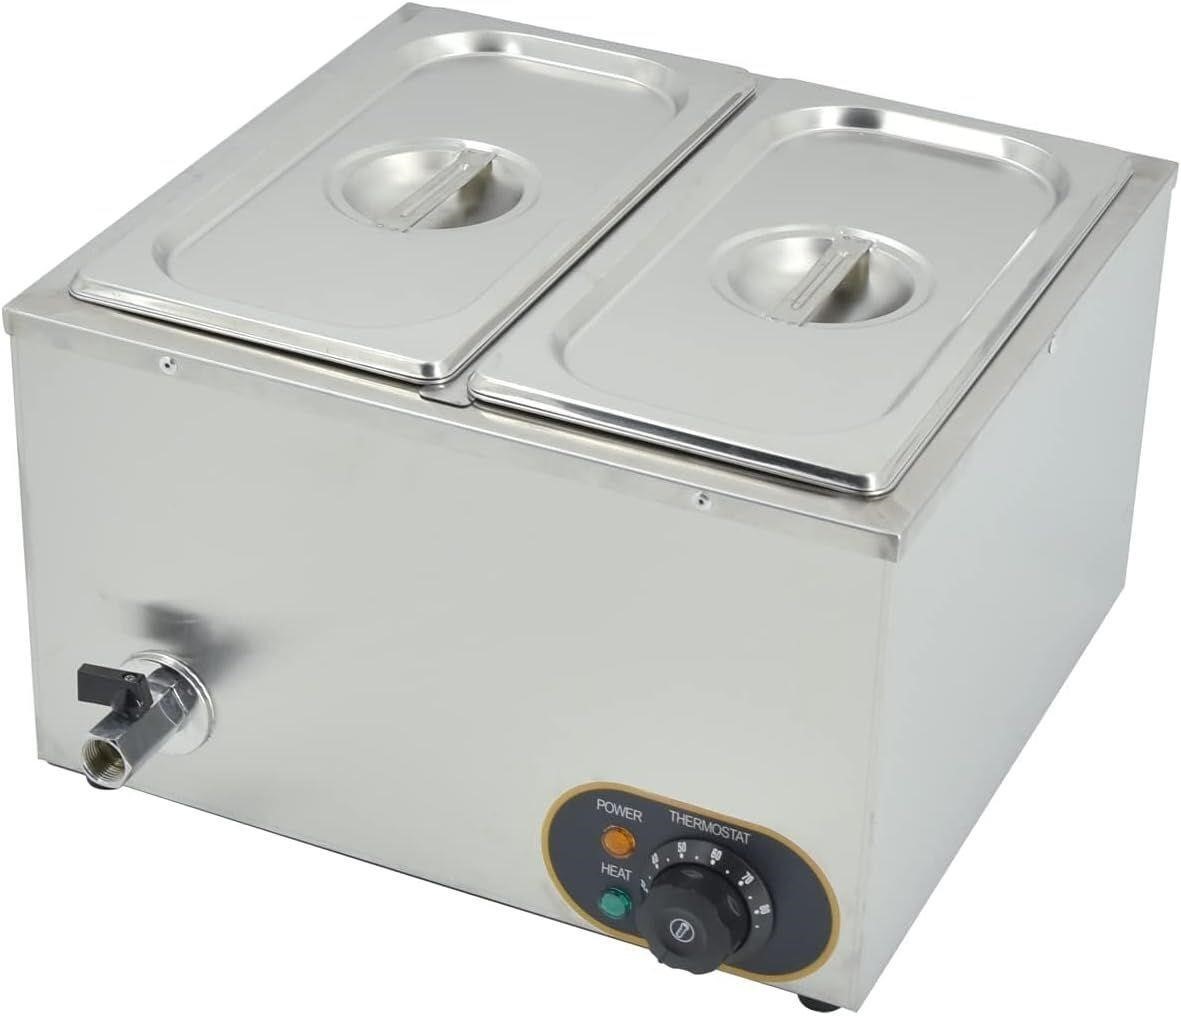 2 Pans Commercial Food Warmer